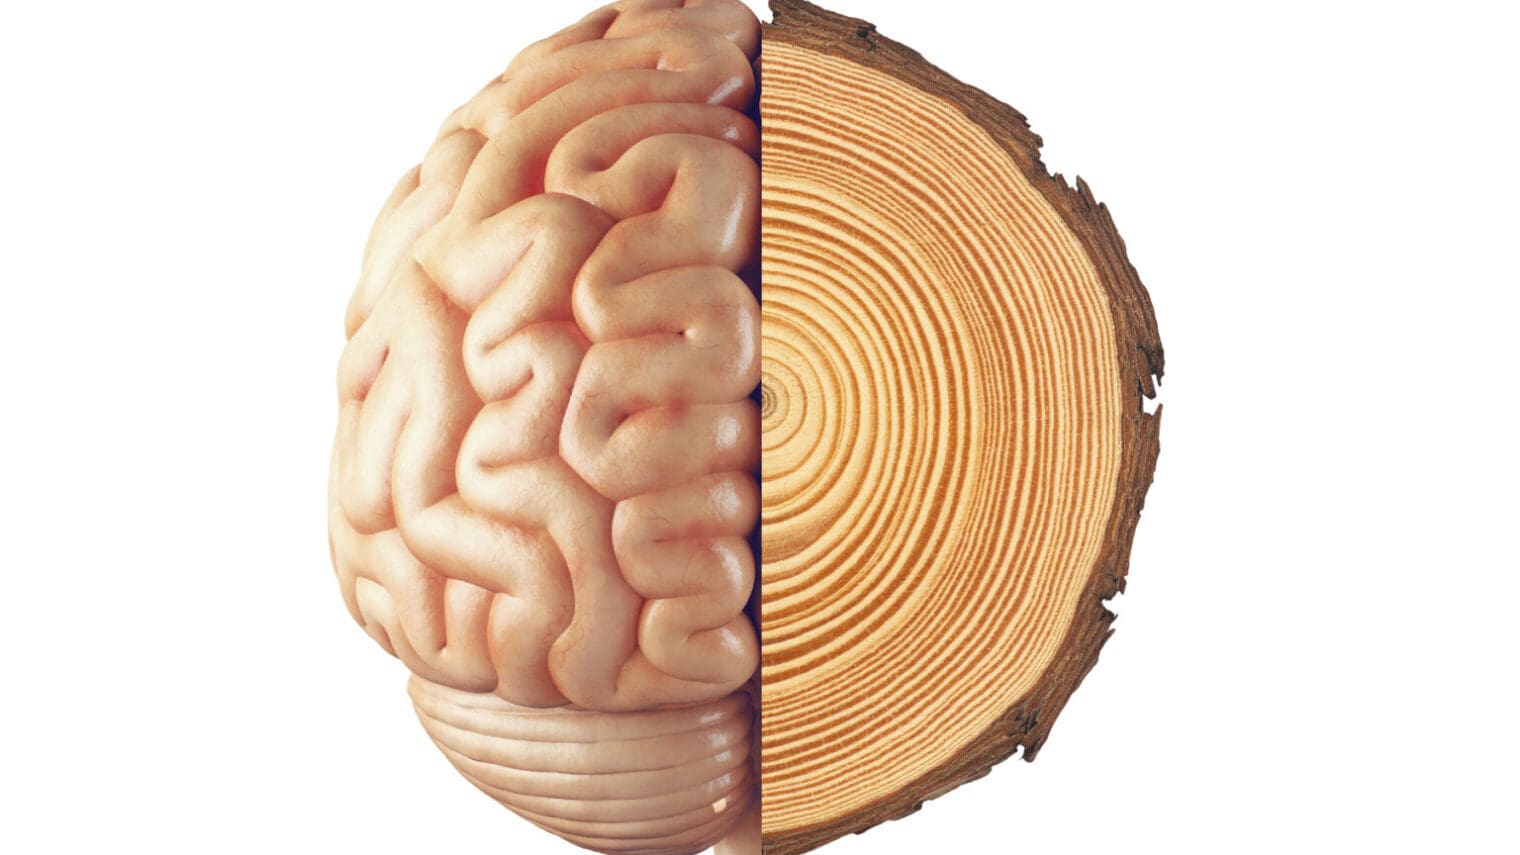 Image with two parts, the left side showing a brain and the right side showing the cut trunk of a tree with wooden rings